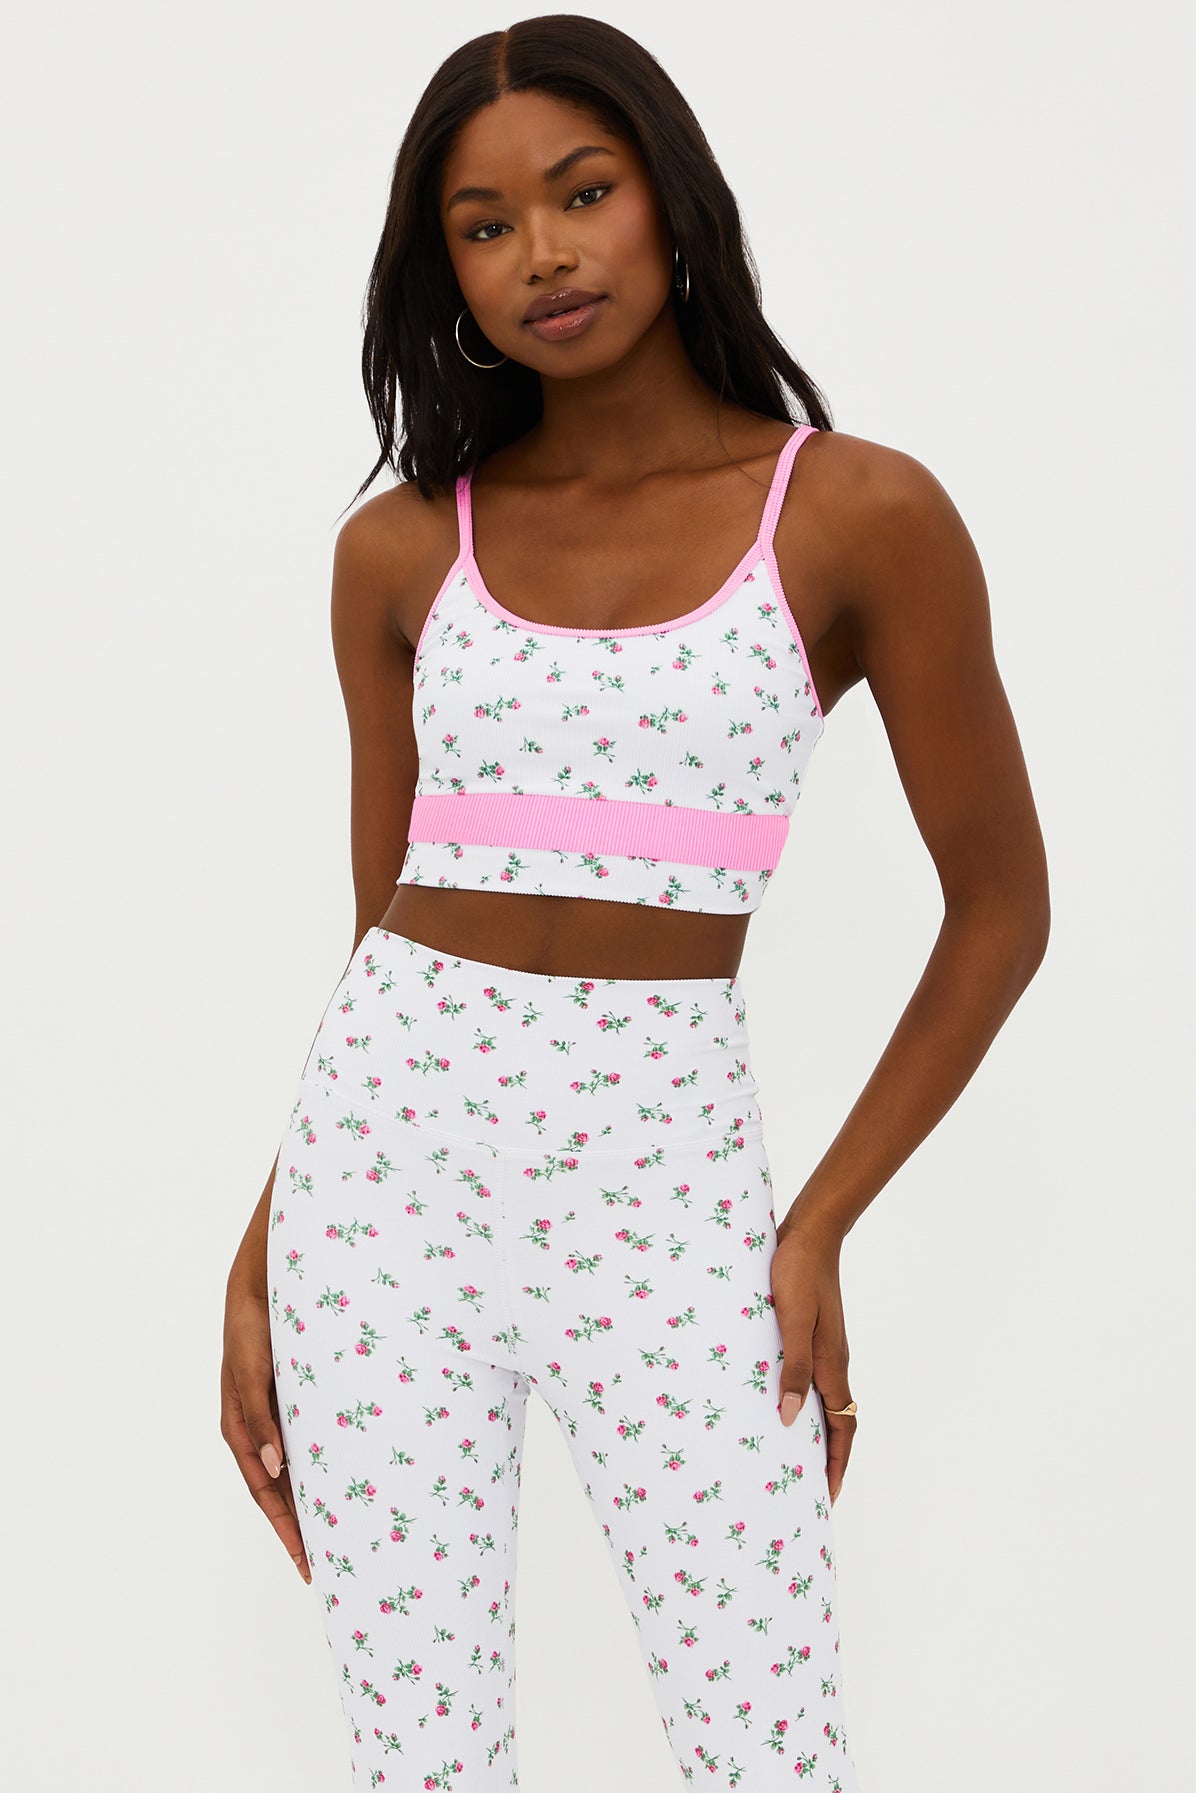 Collection_sport-riot collection_sport-top collection_sport-riot collection_sports-bras collection_new-active-arrivals collection_tennis-shop